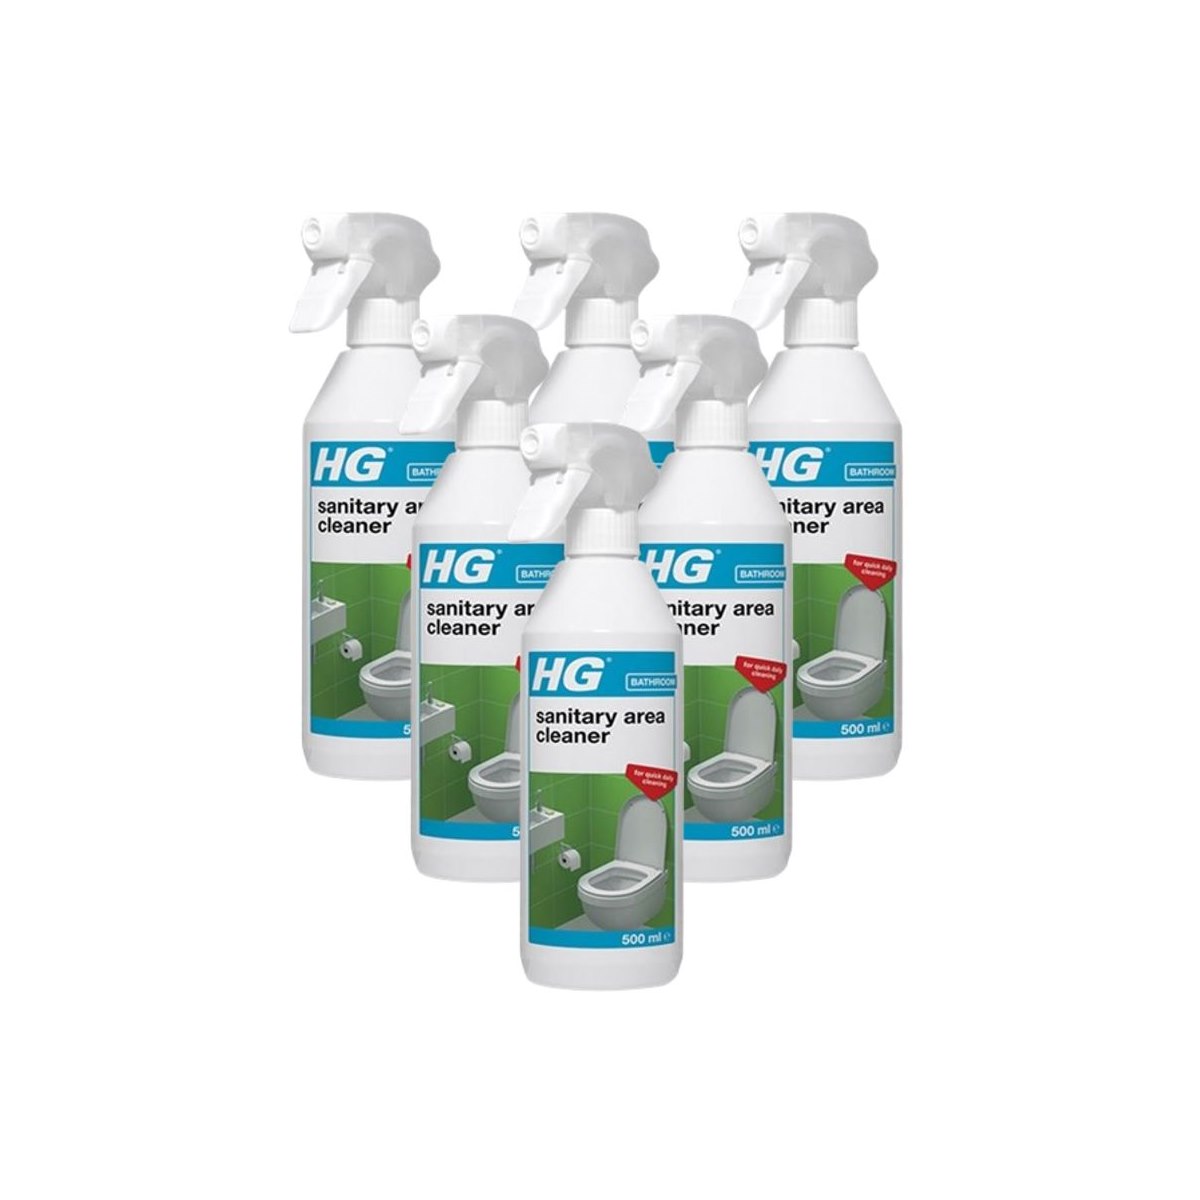 Case of 6 x HG Sanitary Area Cleaner 500ml